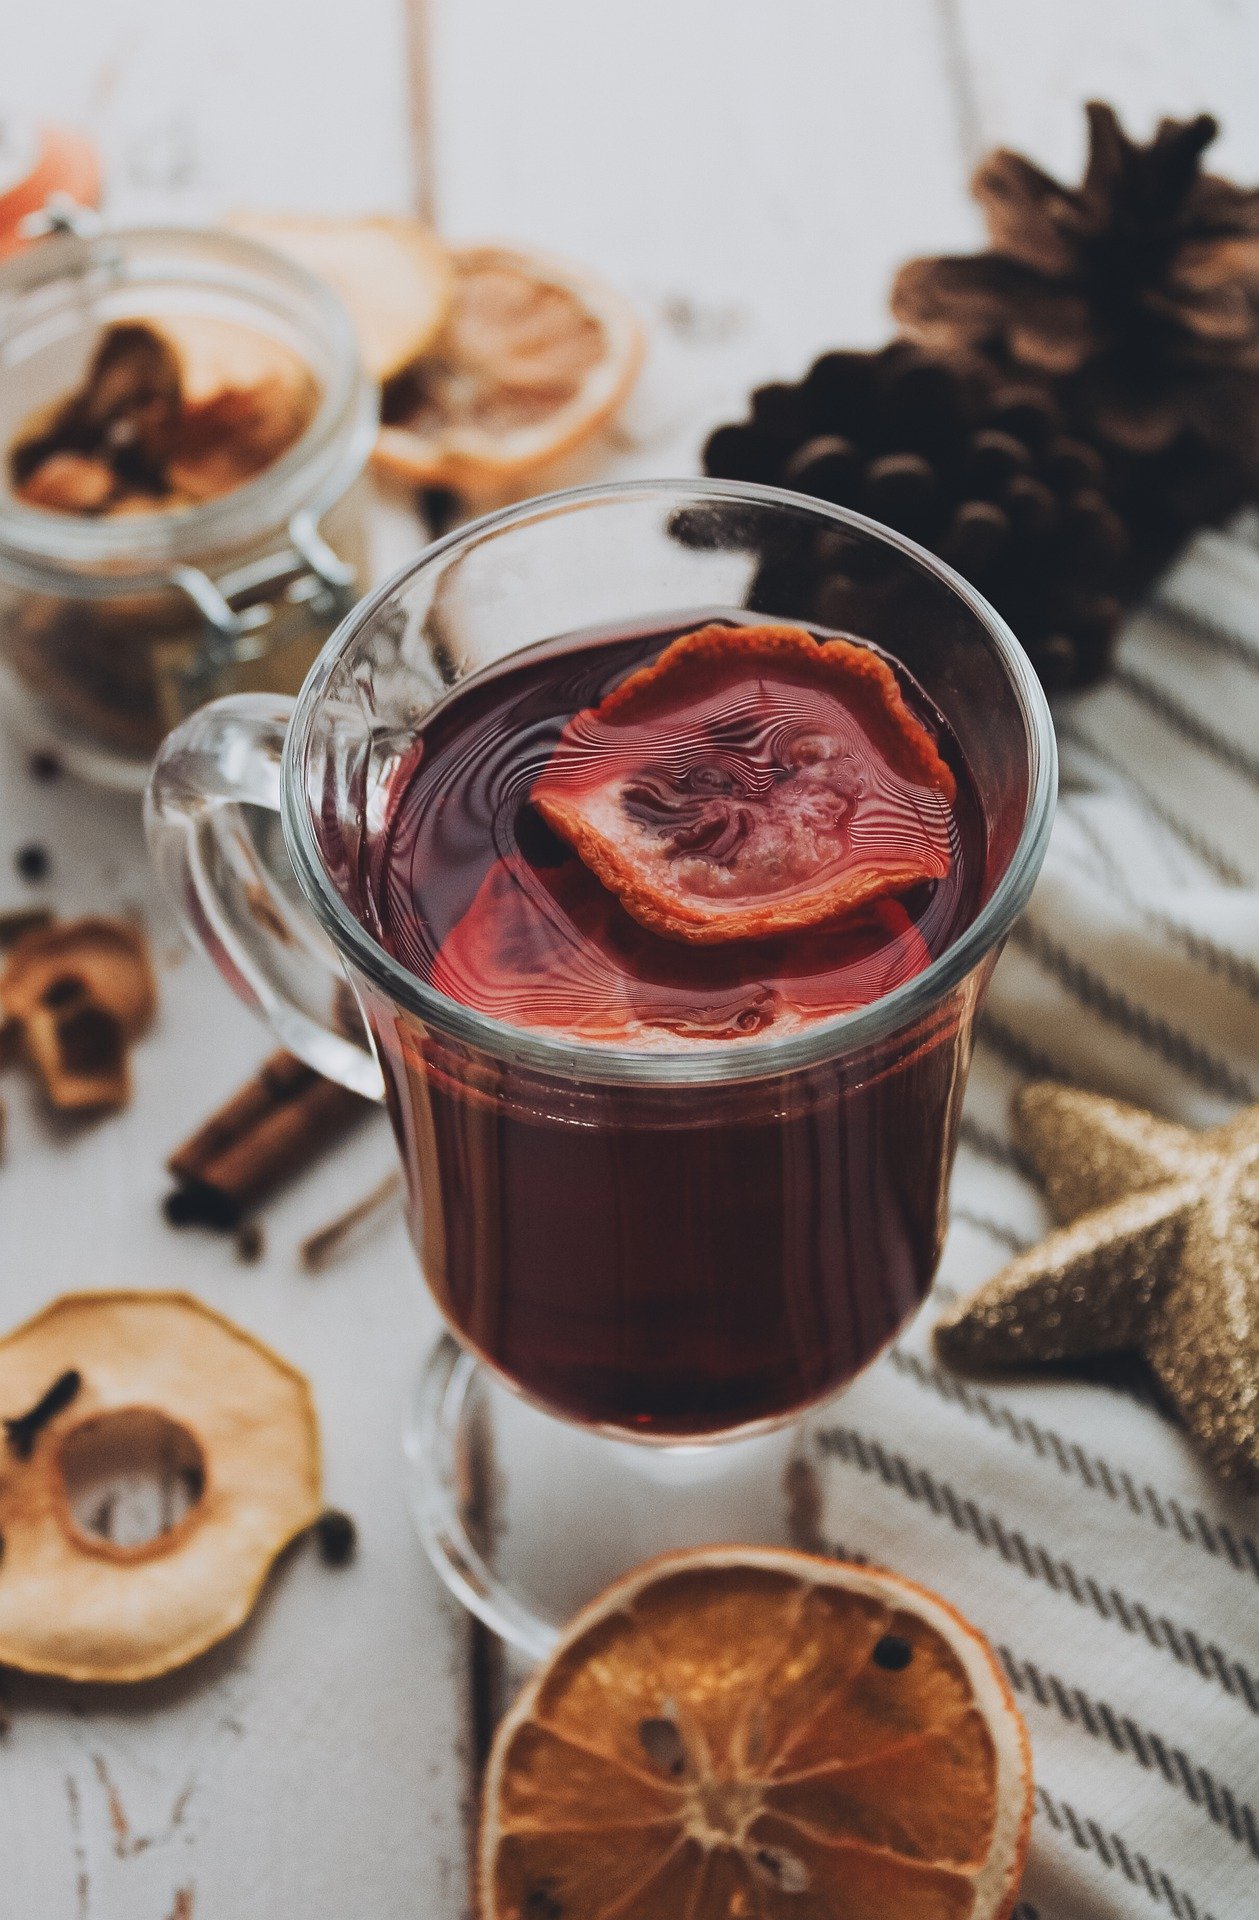 Alpine feeling at home with a Mulled wine